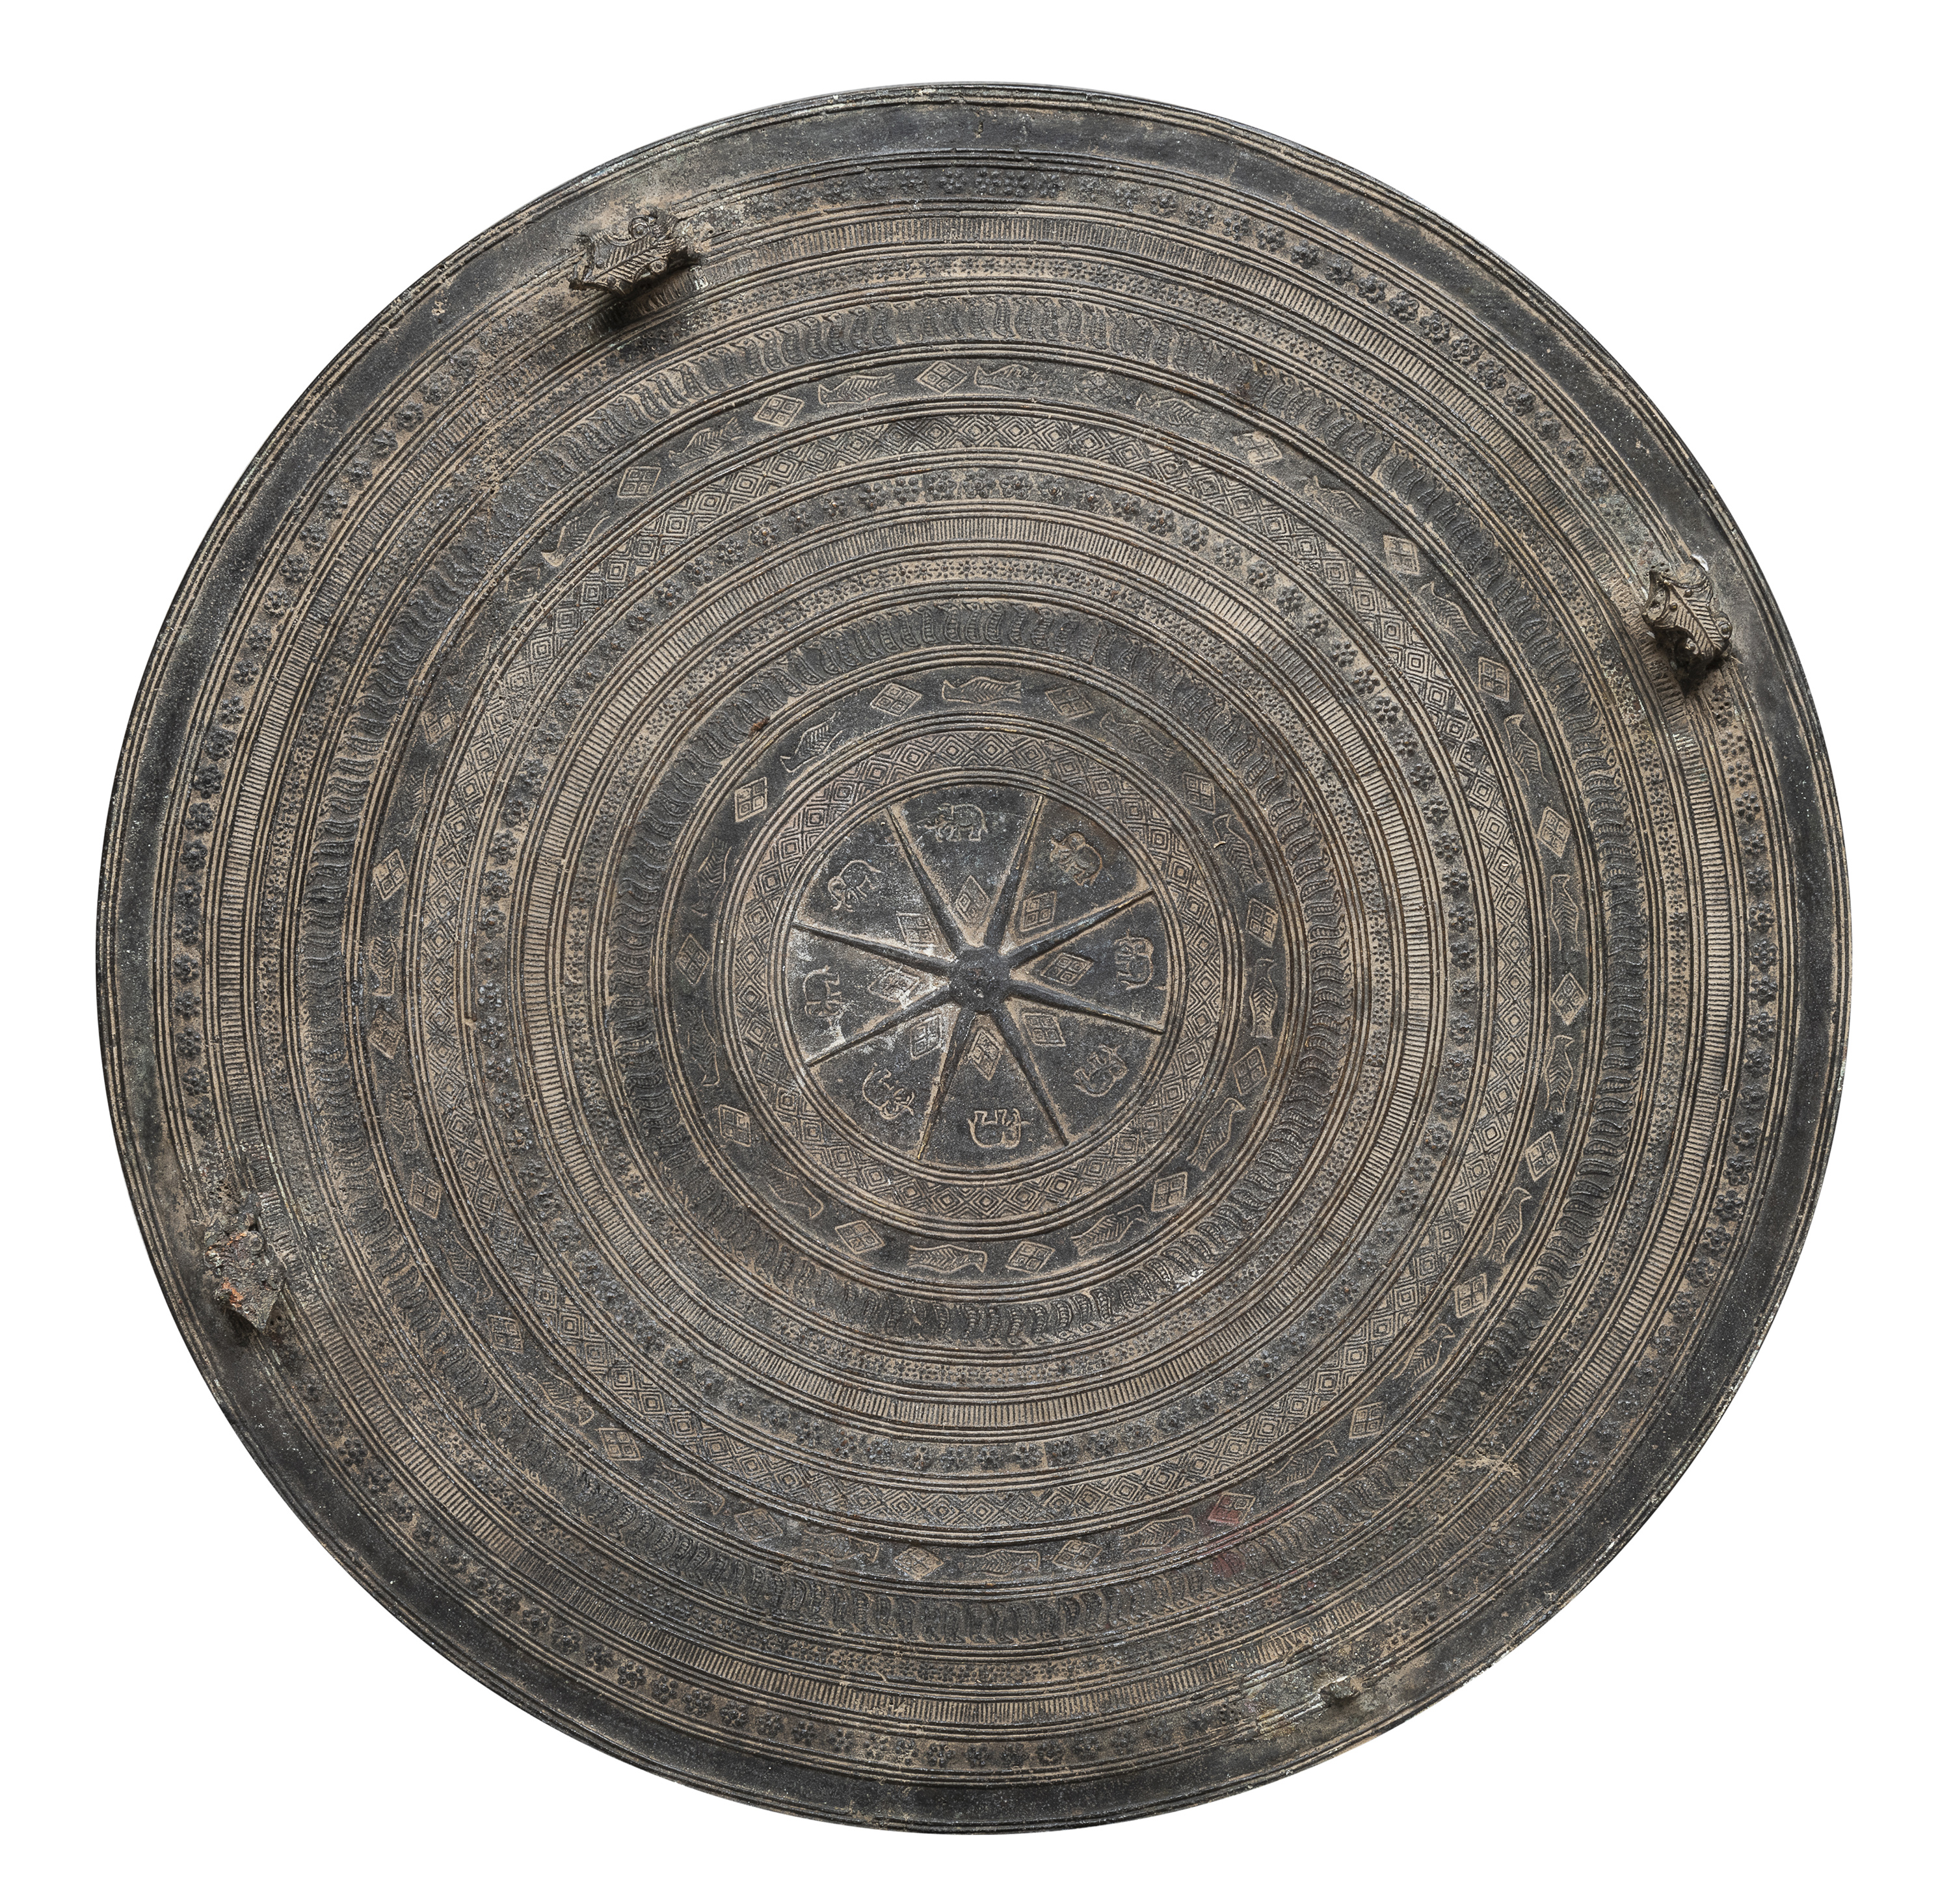 A BURMA BRONZE FROG DRUM. 18TH CENTURY. MISSING PART. - Image 2 of 2